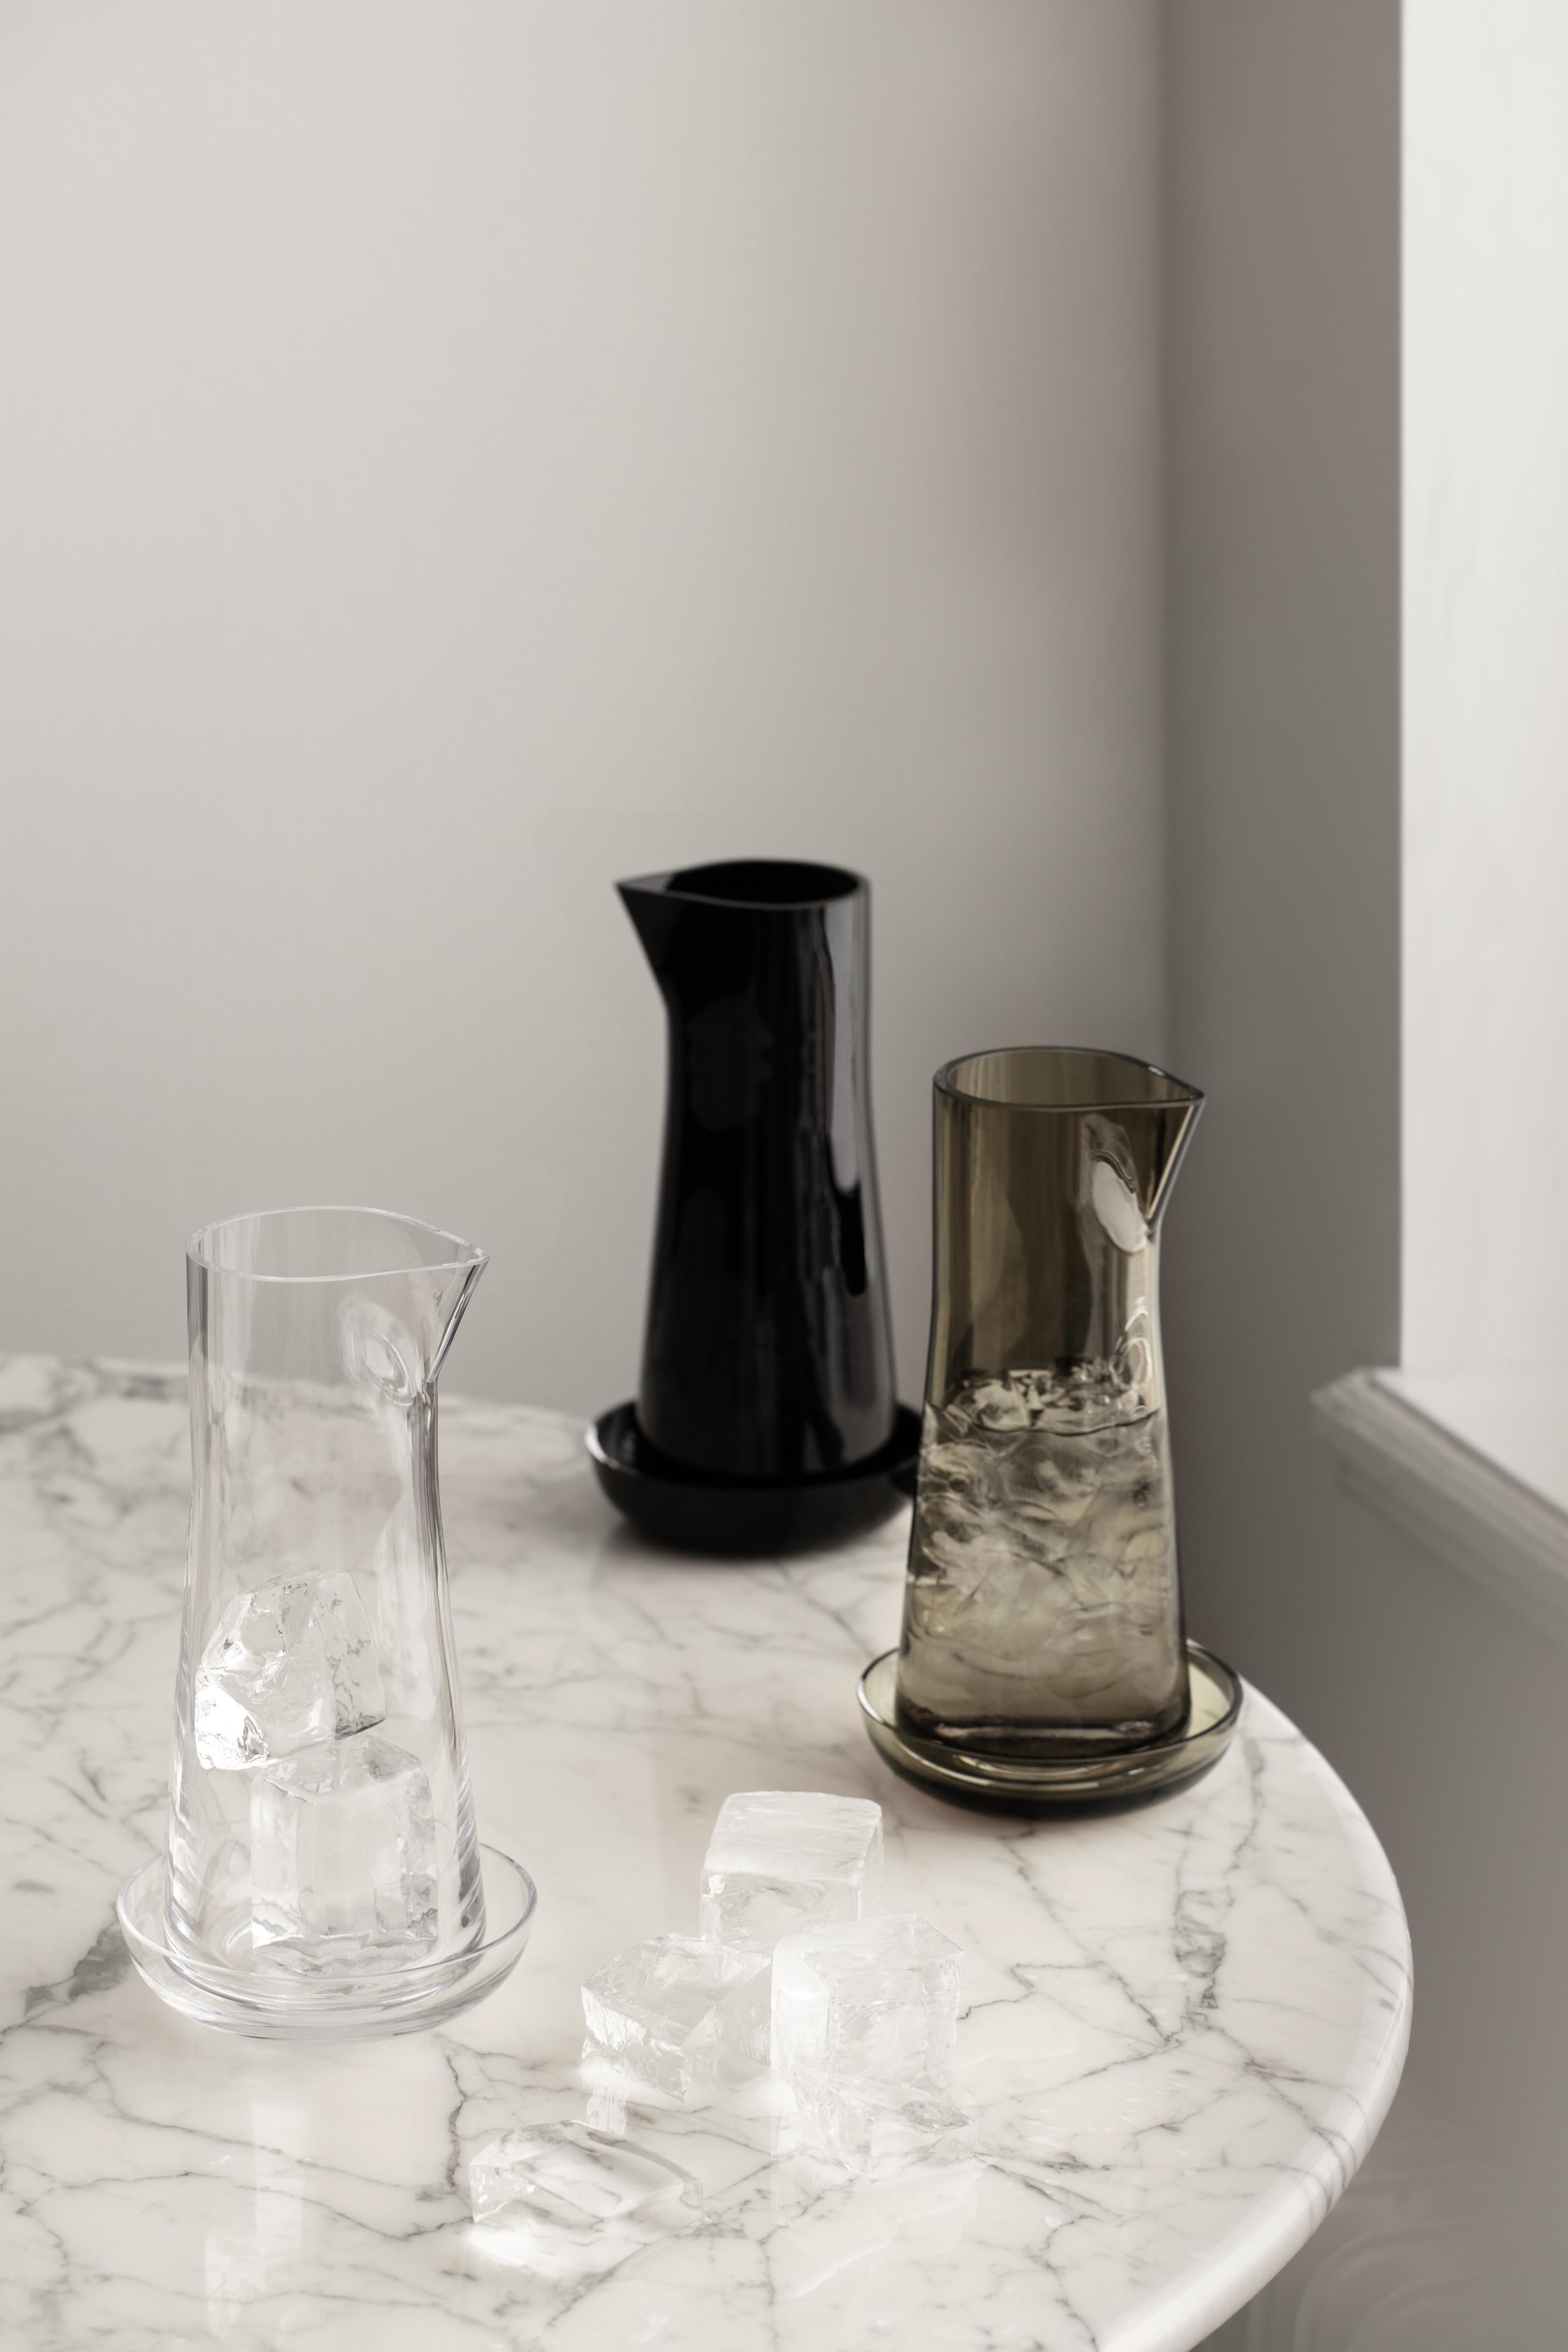 The Informal carafe in black from Orrefors holds 34 oz and is the centerpiece of the collection. It has a characteristic spout and includes a small bowl that can be used as a coaster for the carafe. The bowl is also perfect for serving nuts, olives,